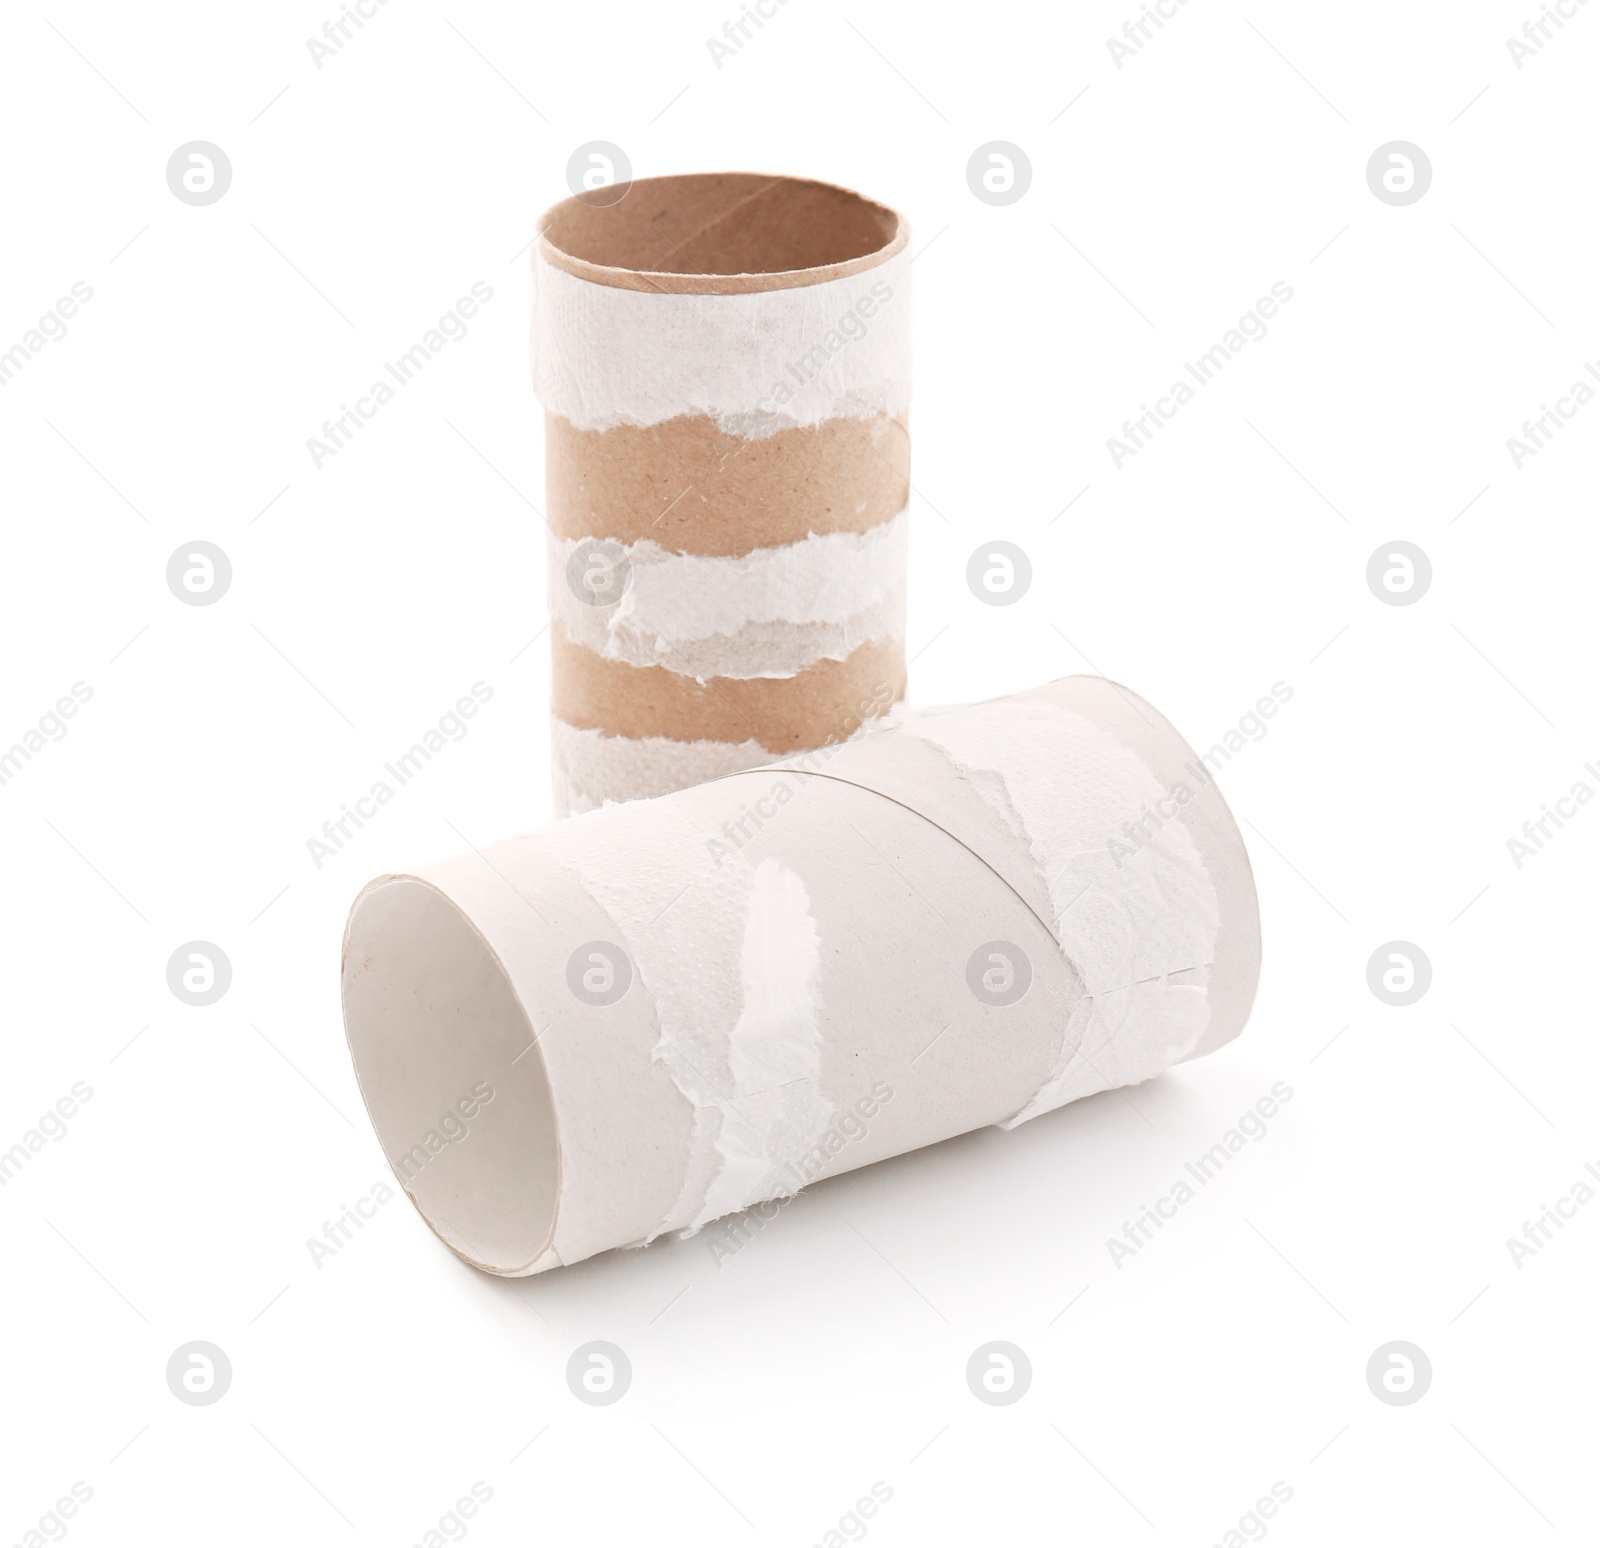 Photo of Empty paper toilet rolls on white background